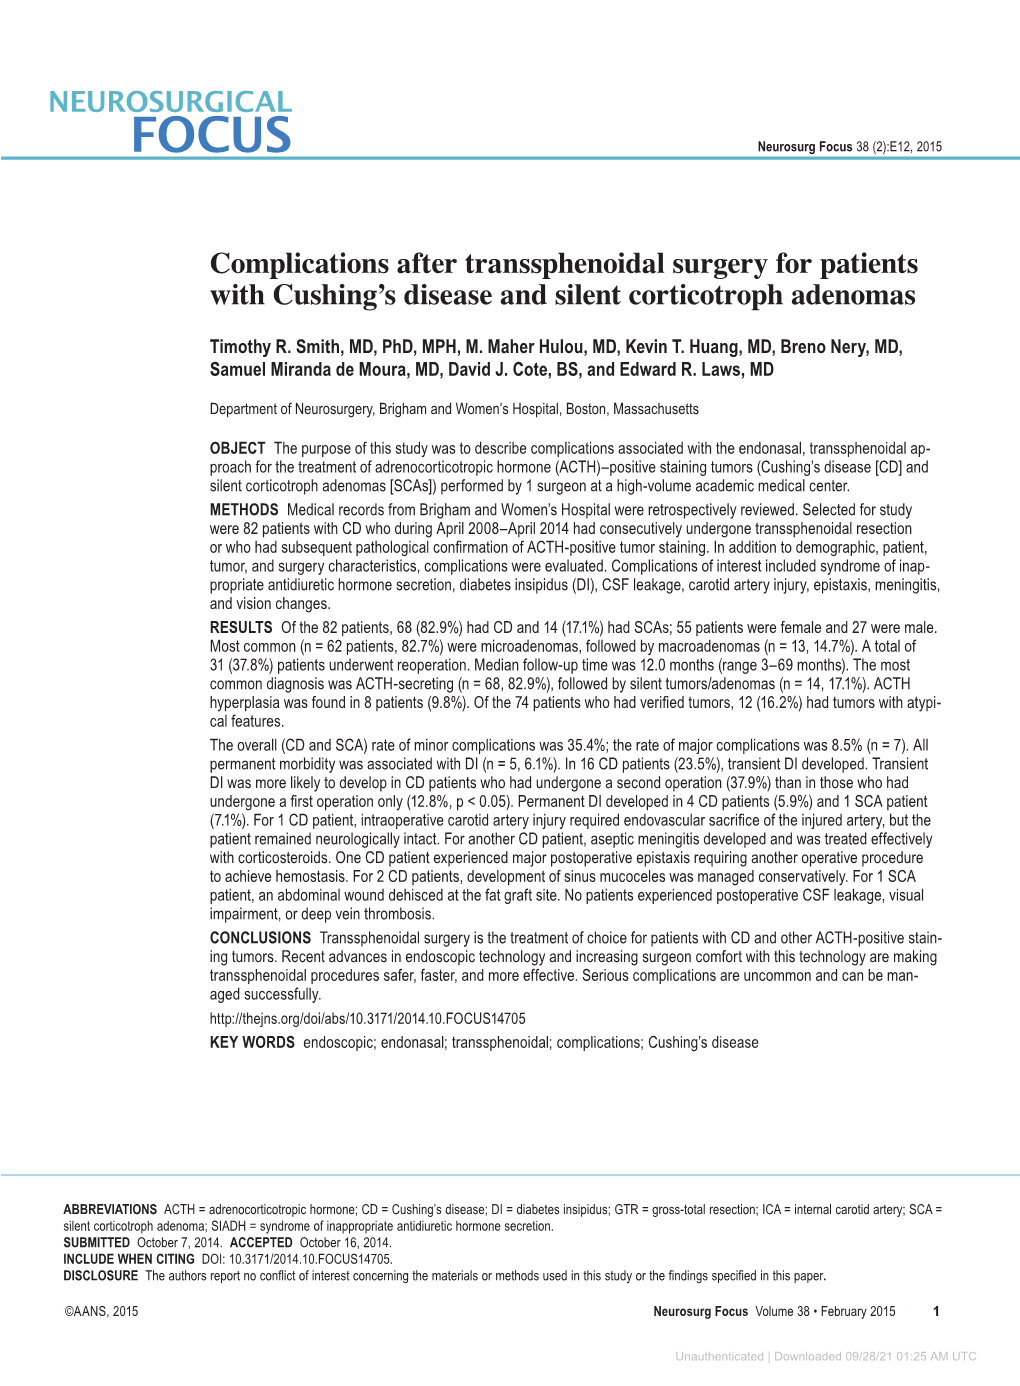 Complications After Transsphenoidal Surgery for Patients with Cushing’S Disease and Silent Corticotroph Adenomas